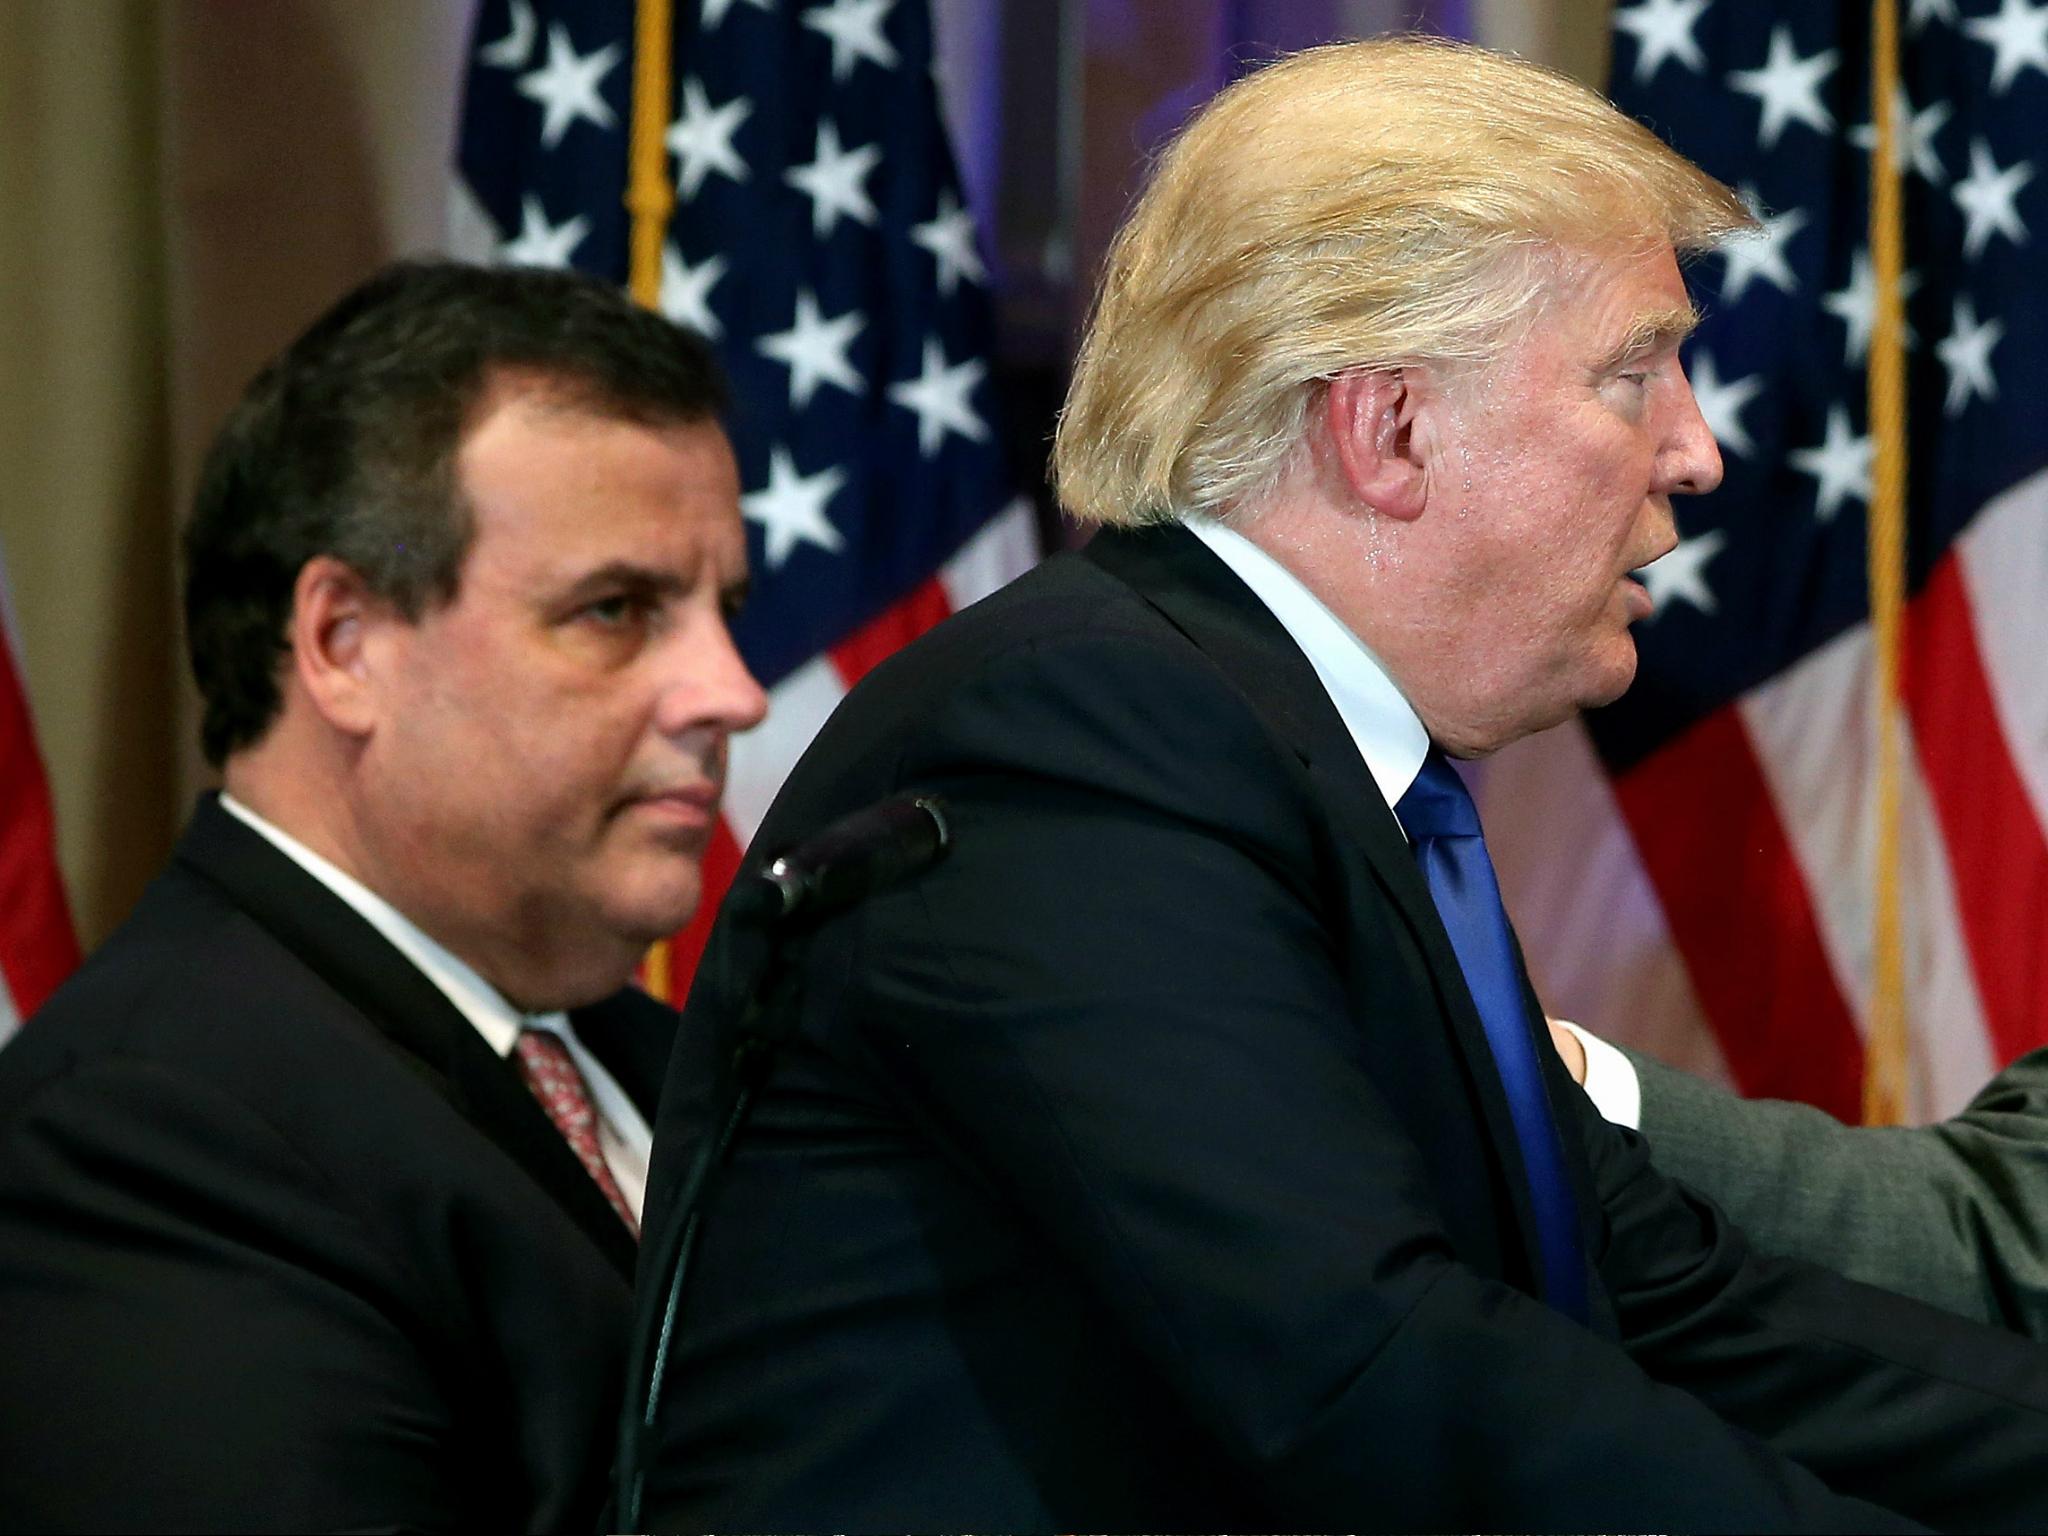 New Jersey Governor Chris Christie accompanies then-Republican Presidential frontrunner Donald Trump off the stage after a press conference on Super Tuesday, 1 March 2016 in Florida